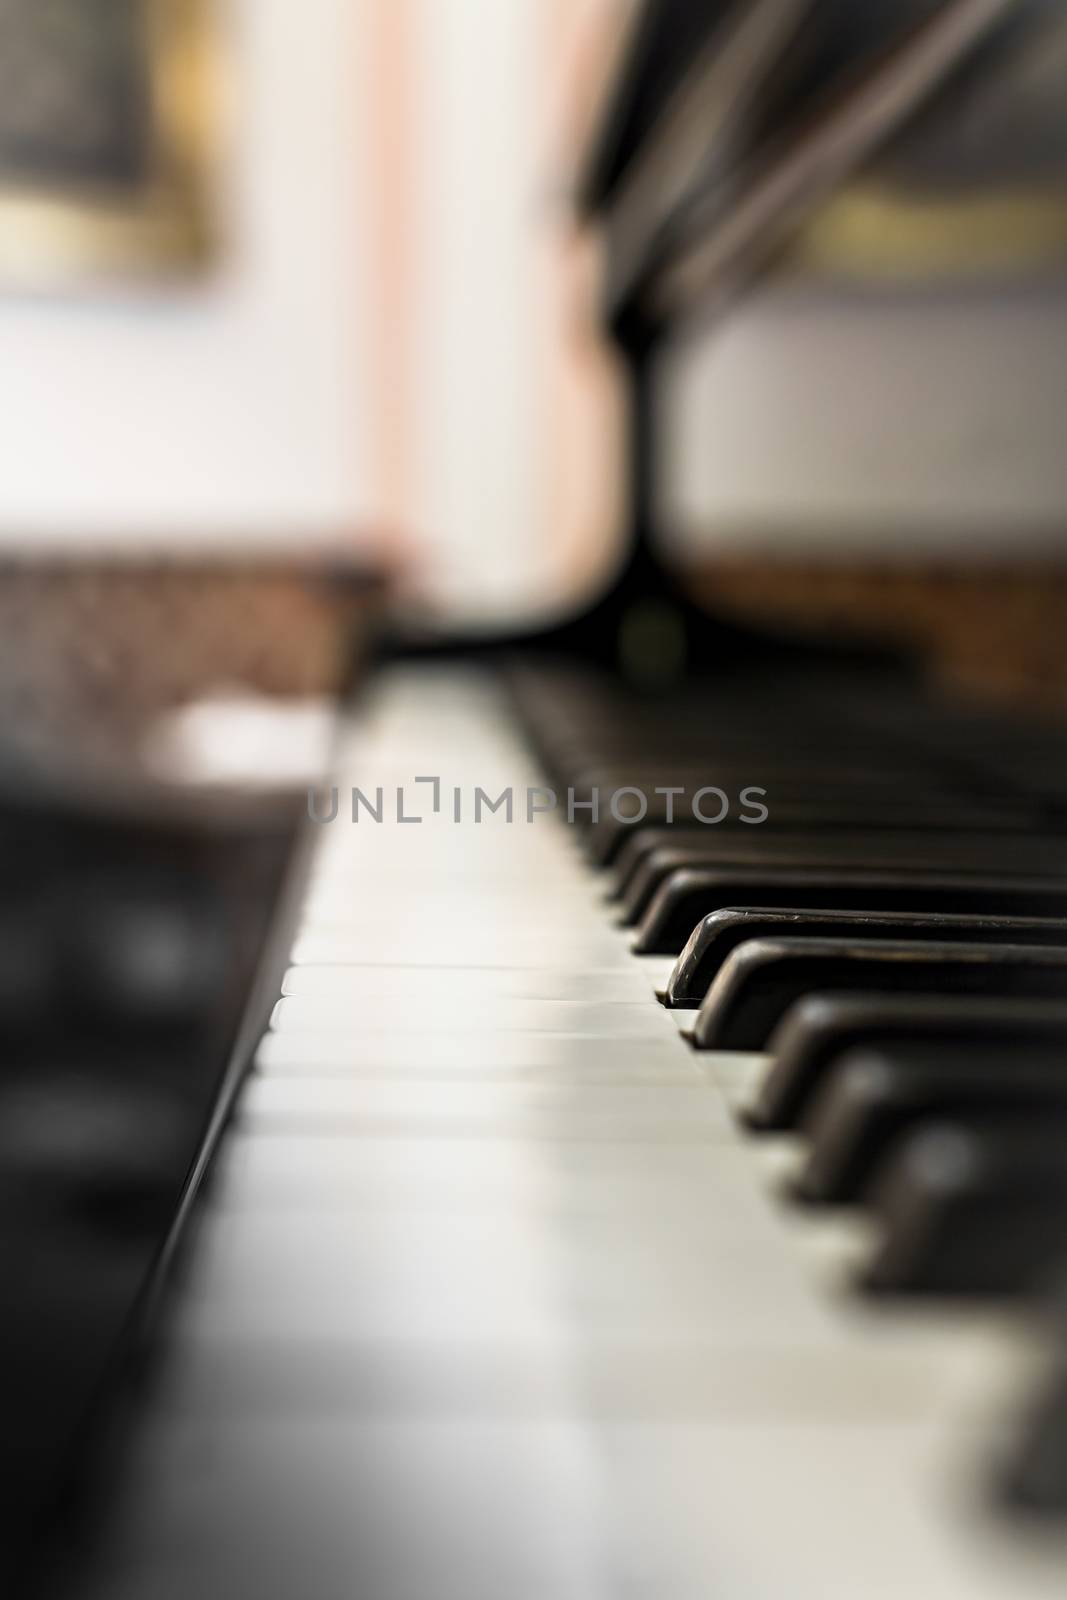 Old Piano keyboard with selective focus, behind a blurred background.